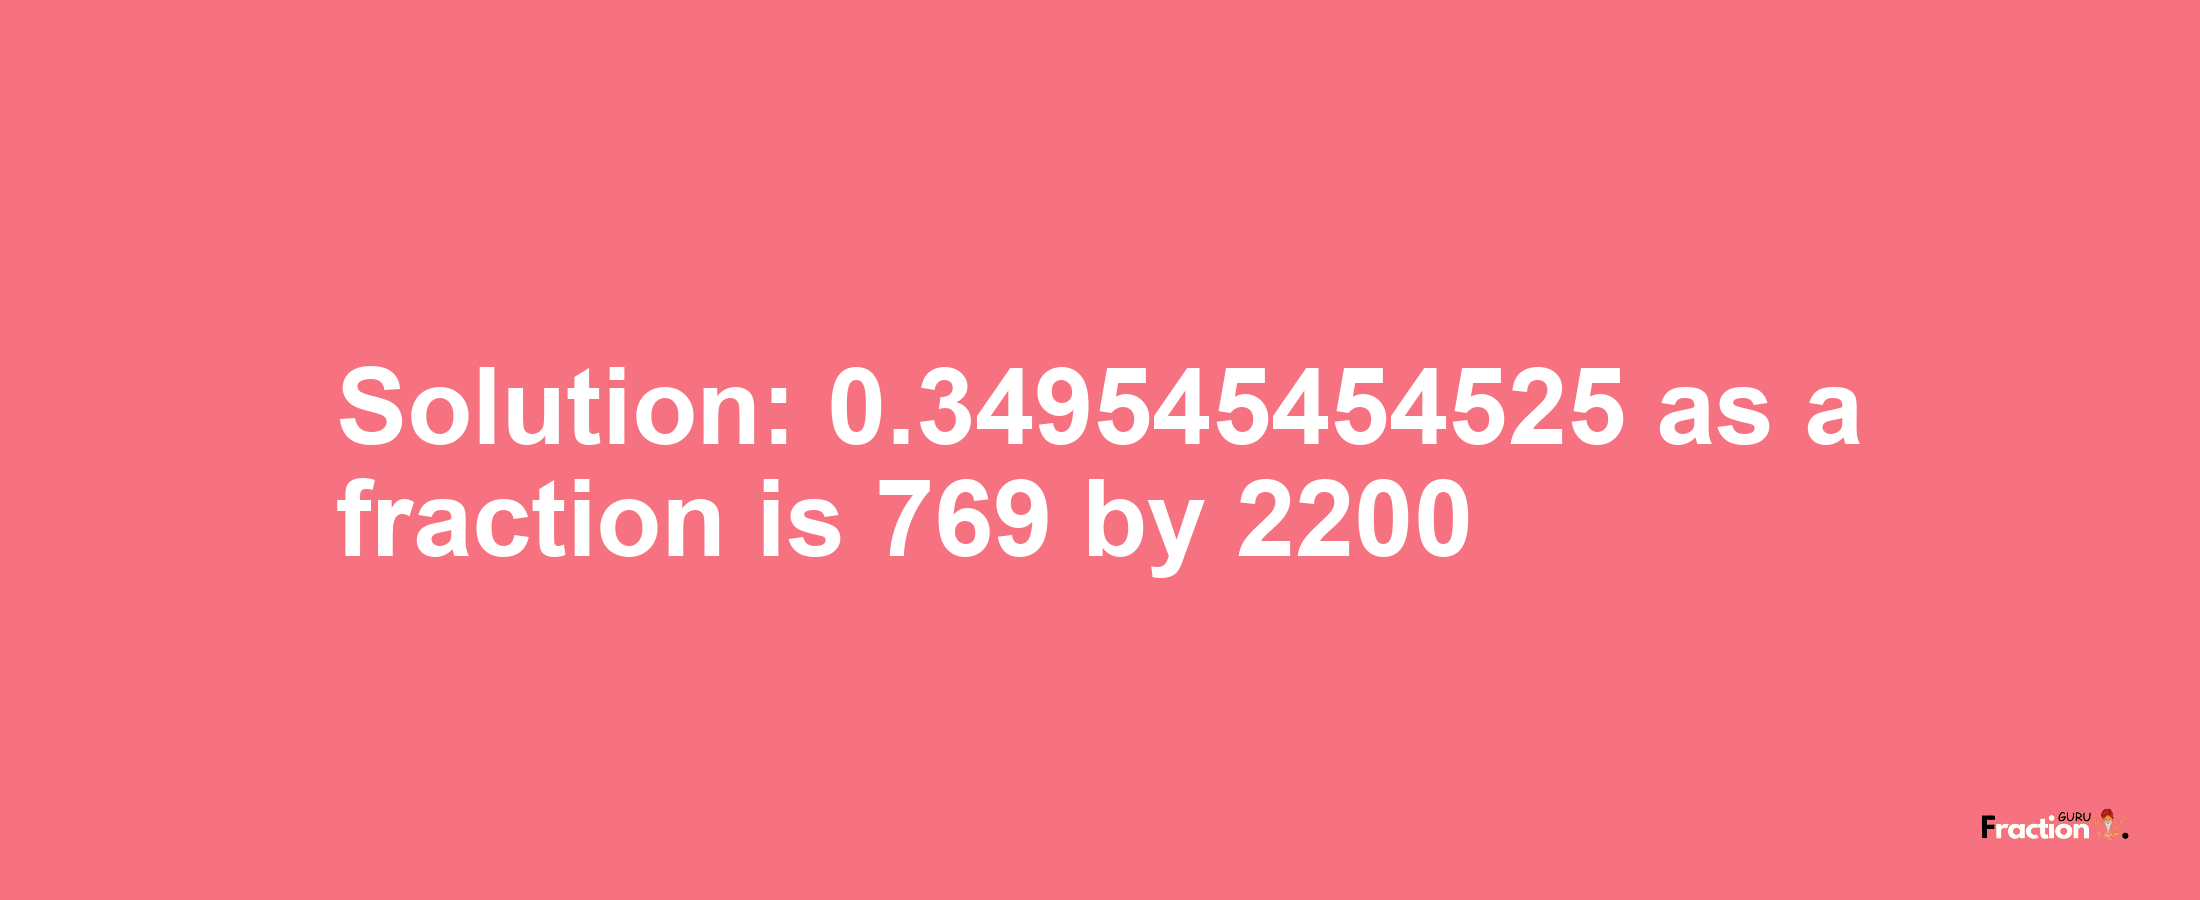 Solution:0.349545454525 as a fraction is 769/2200